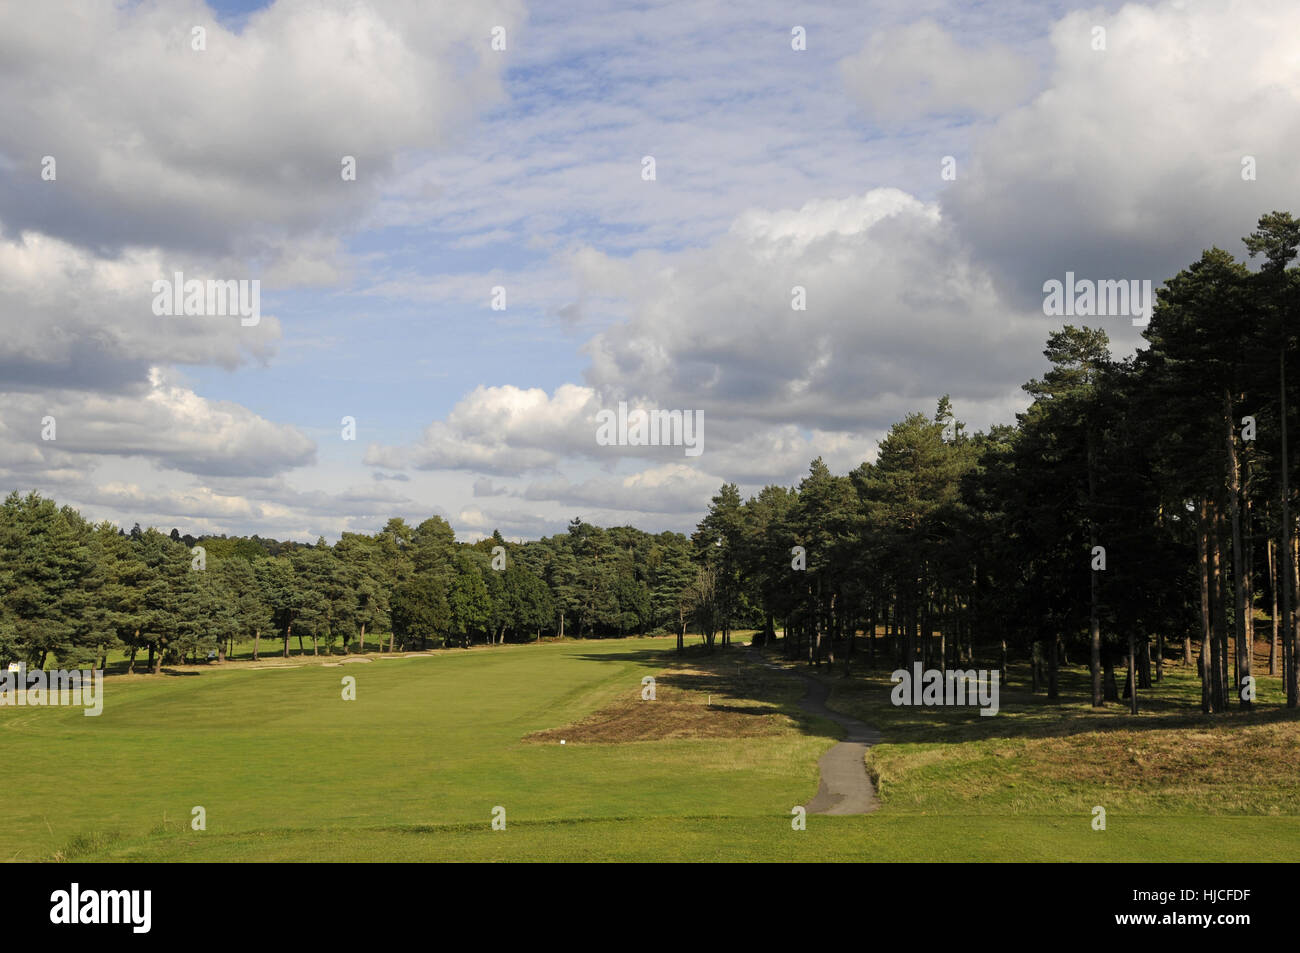 View from the 1st Tee down the fairway, Camberley Heath Golf Club Surrey England Stock Photo